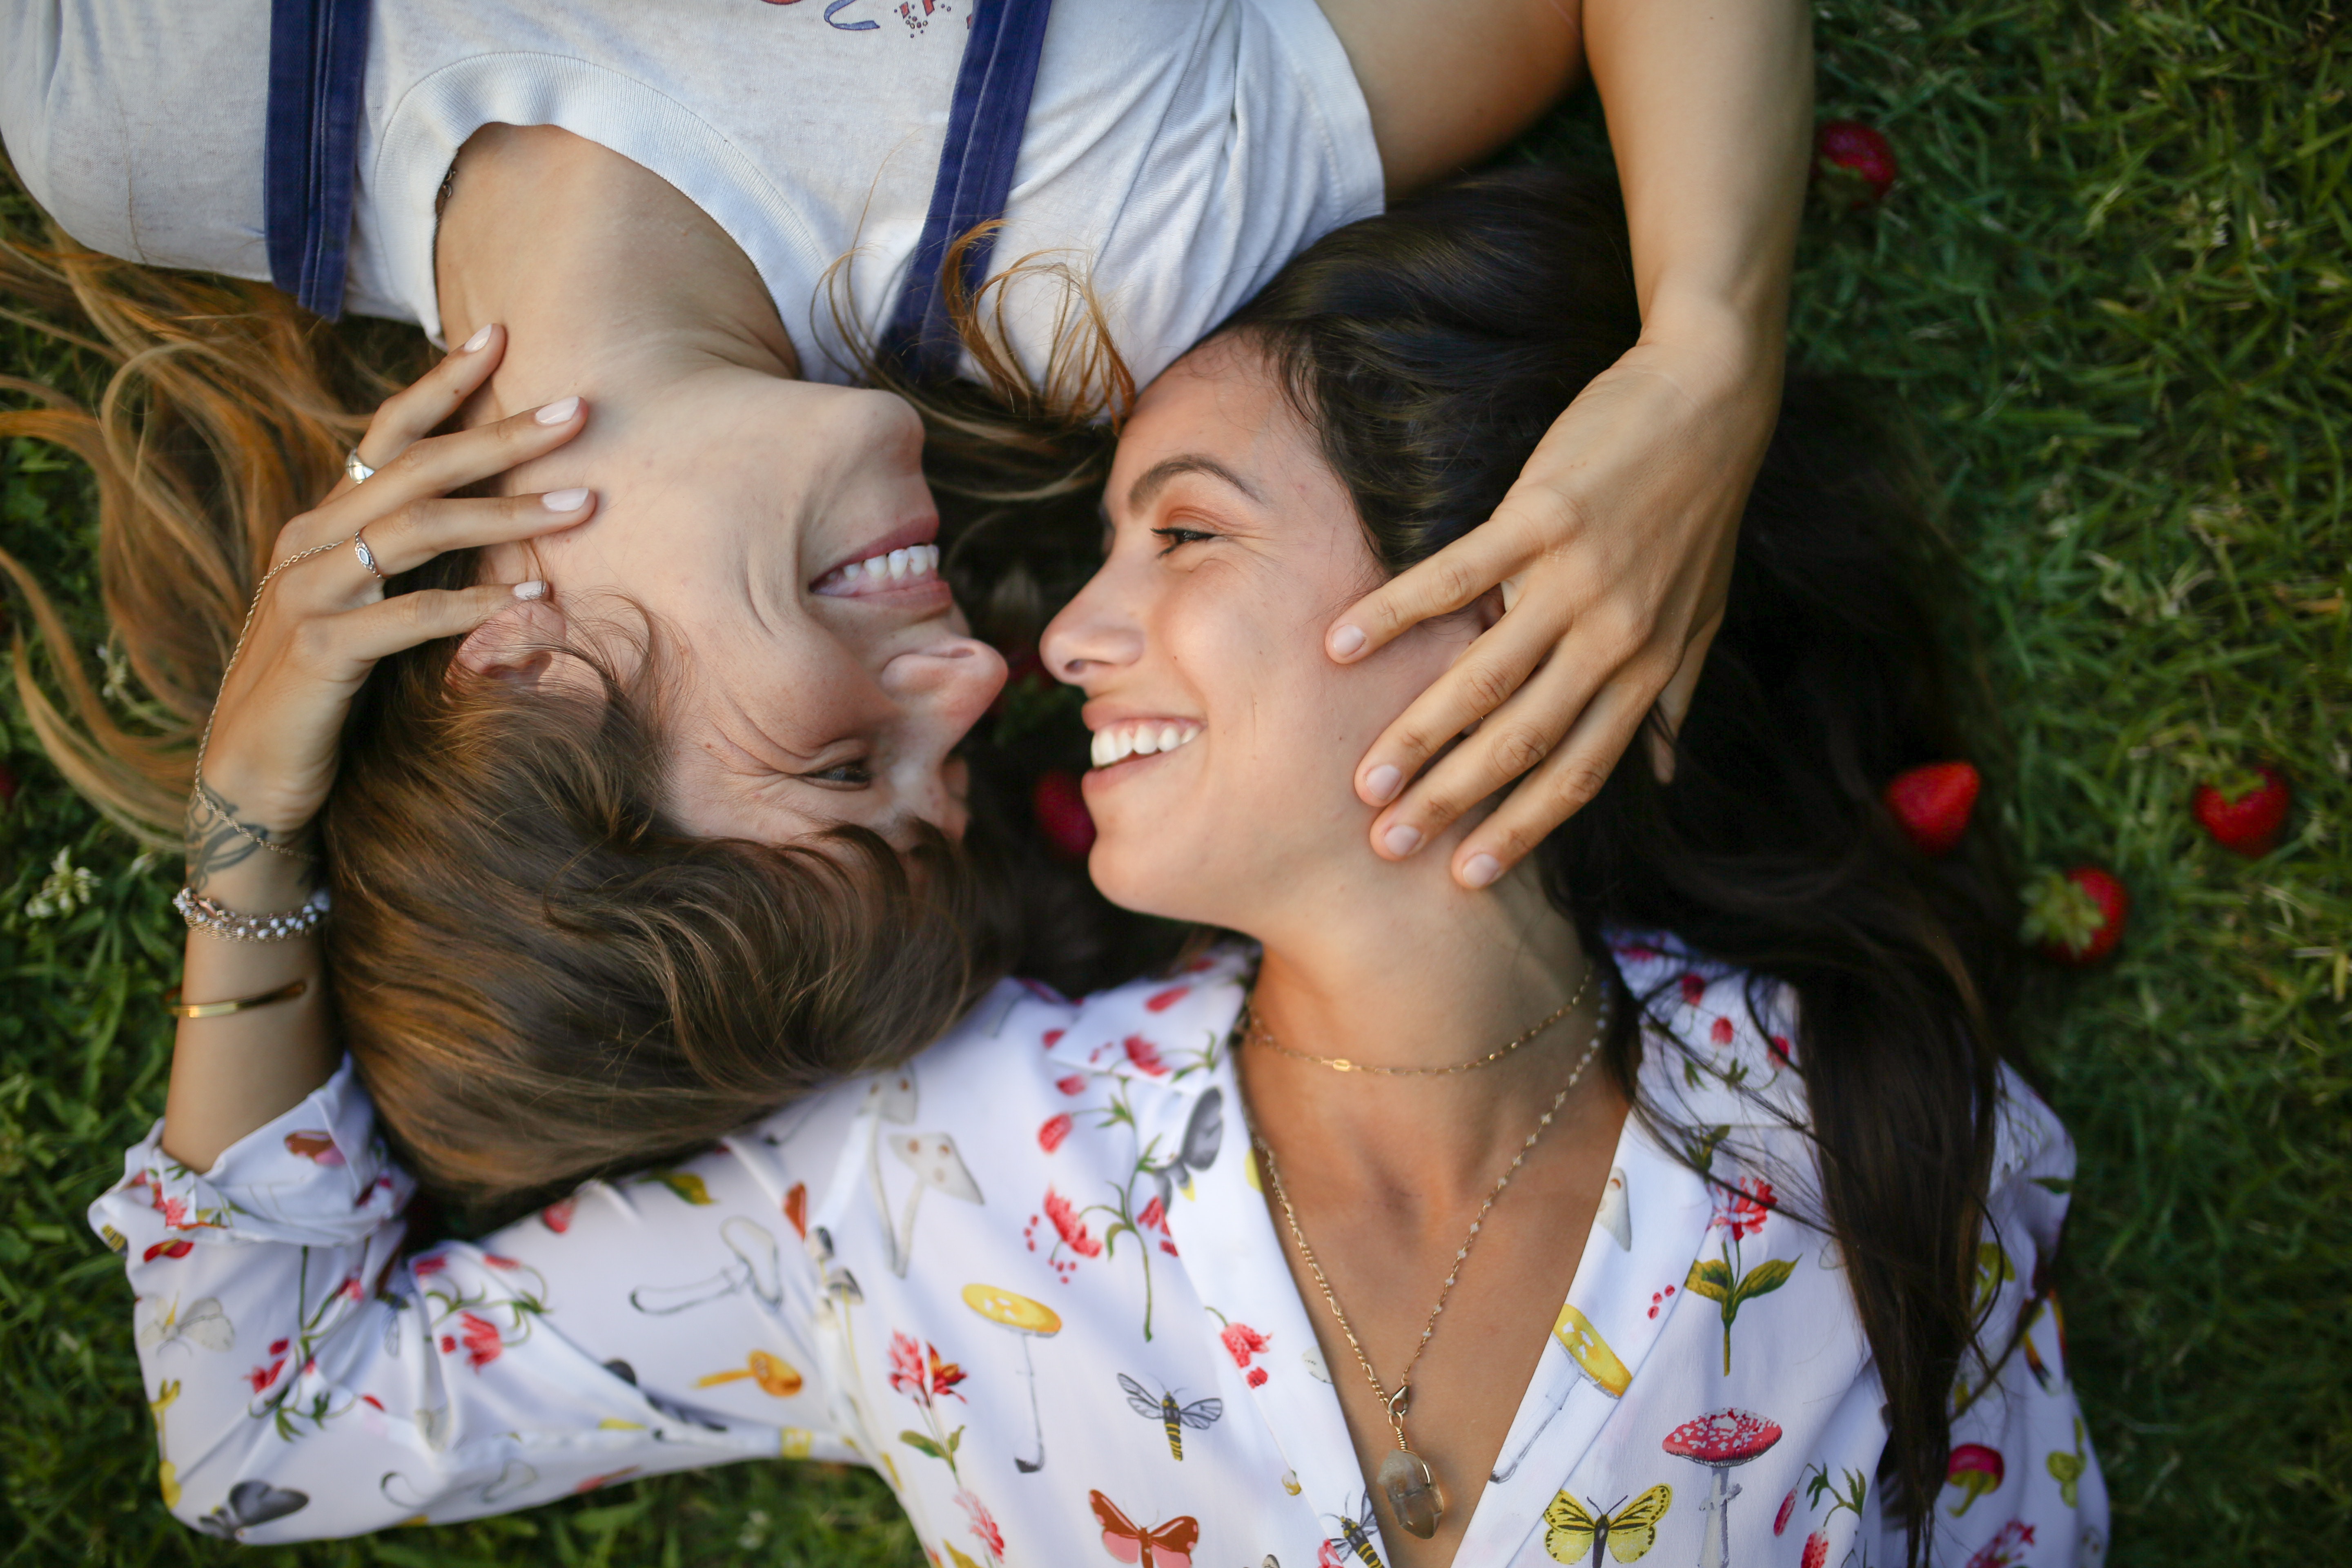 Two attractive women wearing stylish outfits lying on the grass together with one hand on eachothers' faces.